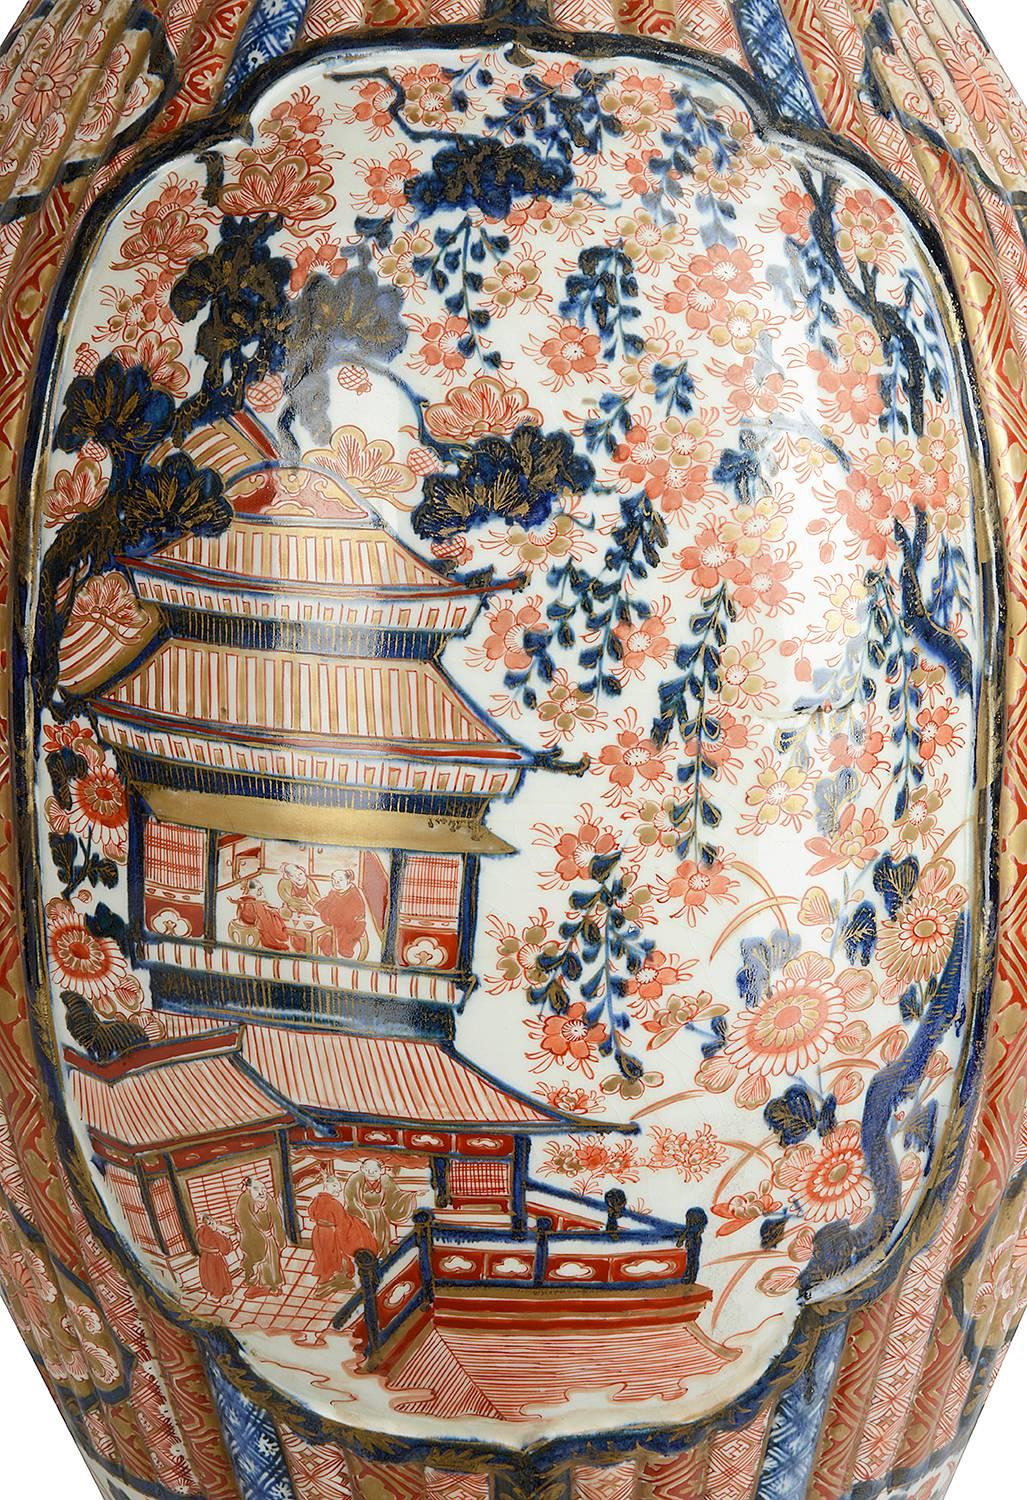 A large and impressive 19th century Japanese Imari Vase, having classic Imari orange, red and blue colors. Traditional motifs to the ground. Mythical birds amongst flowers, the body of the vase having raised reeded form with geometric patterns, with